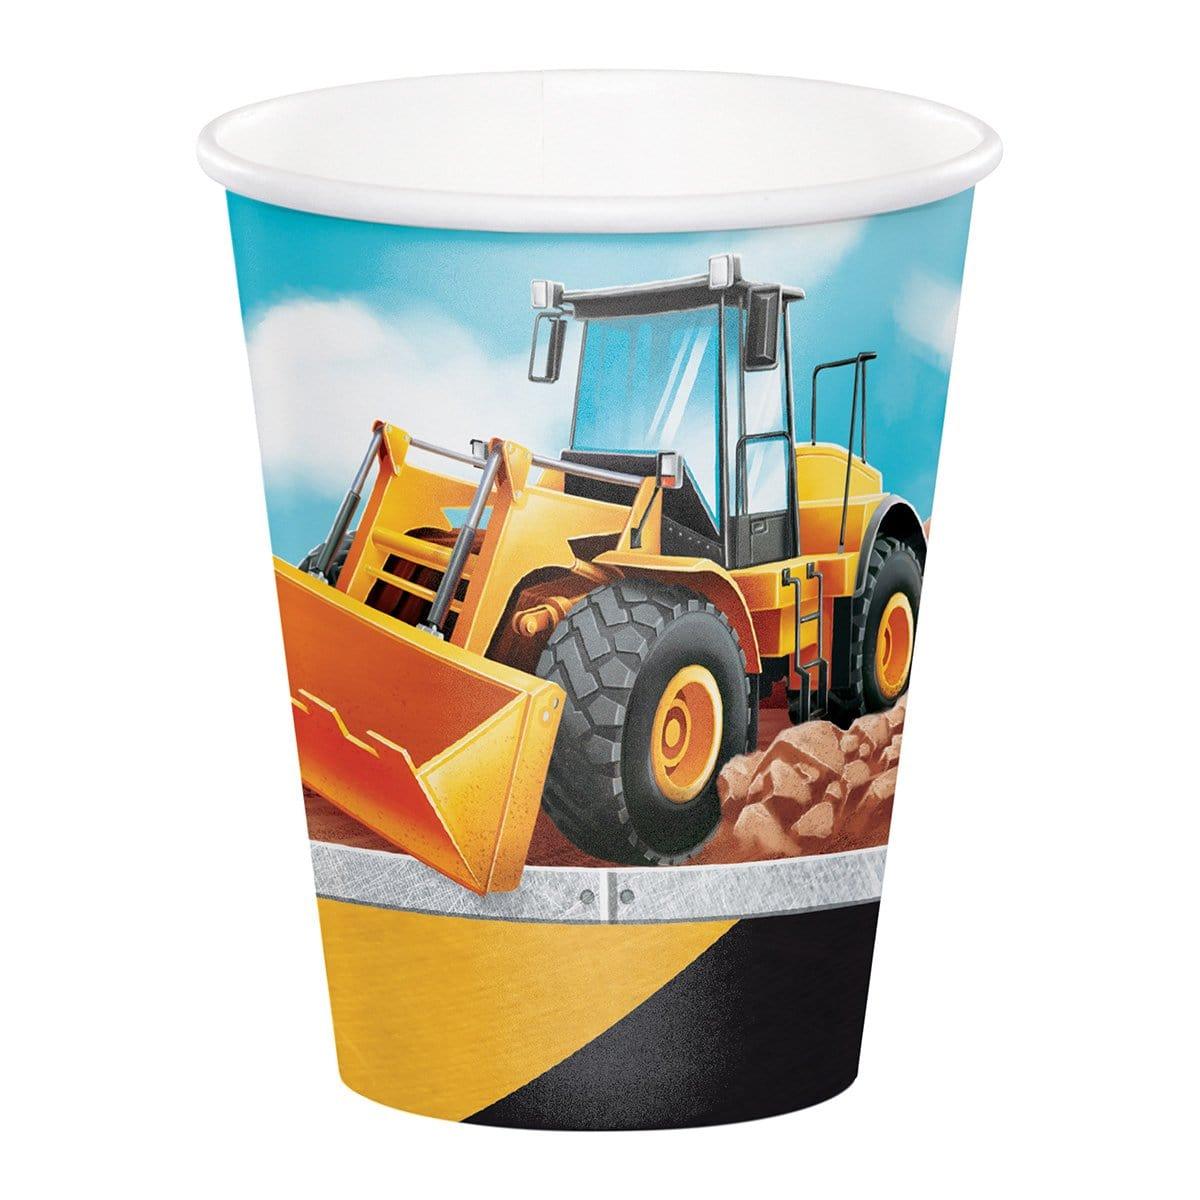 Buy Kids Birthday Big Dig Construction paper cups 9 ounces, 8 per package sold at Party Expert